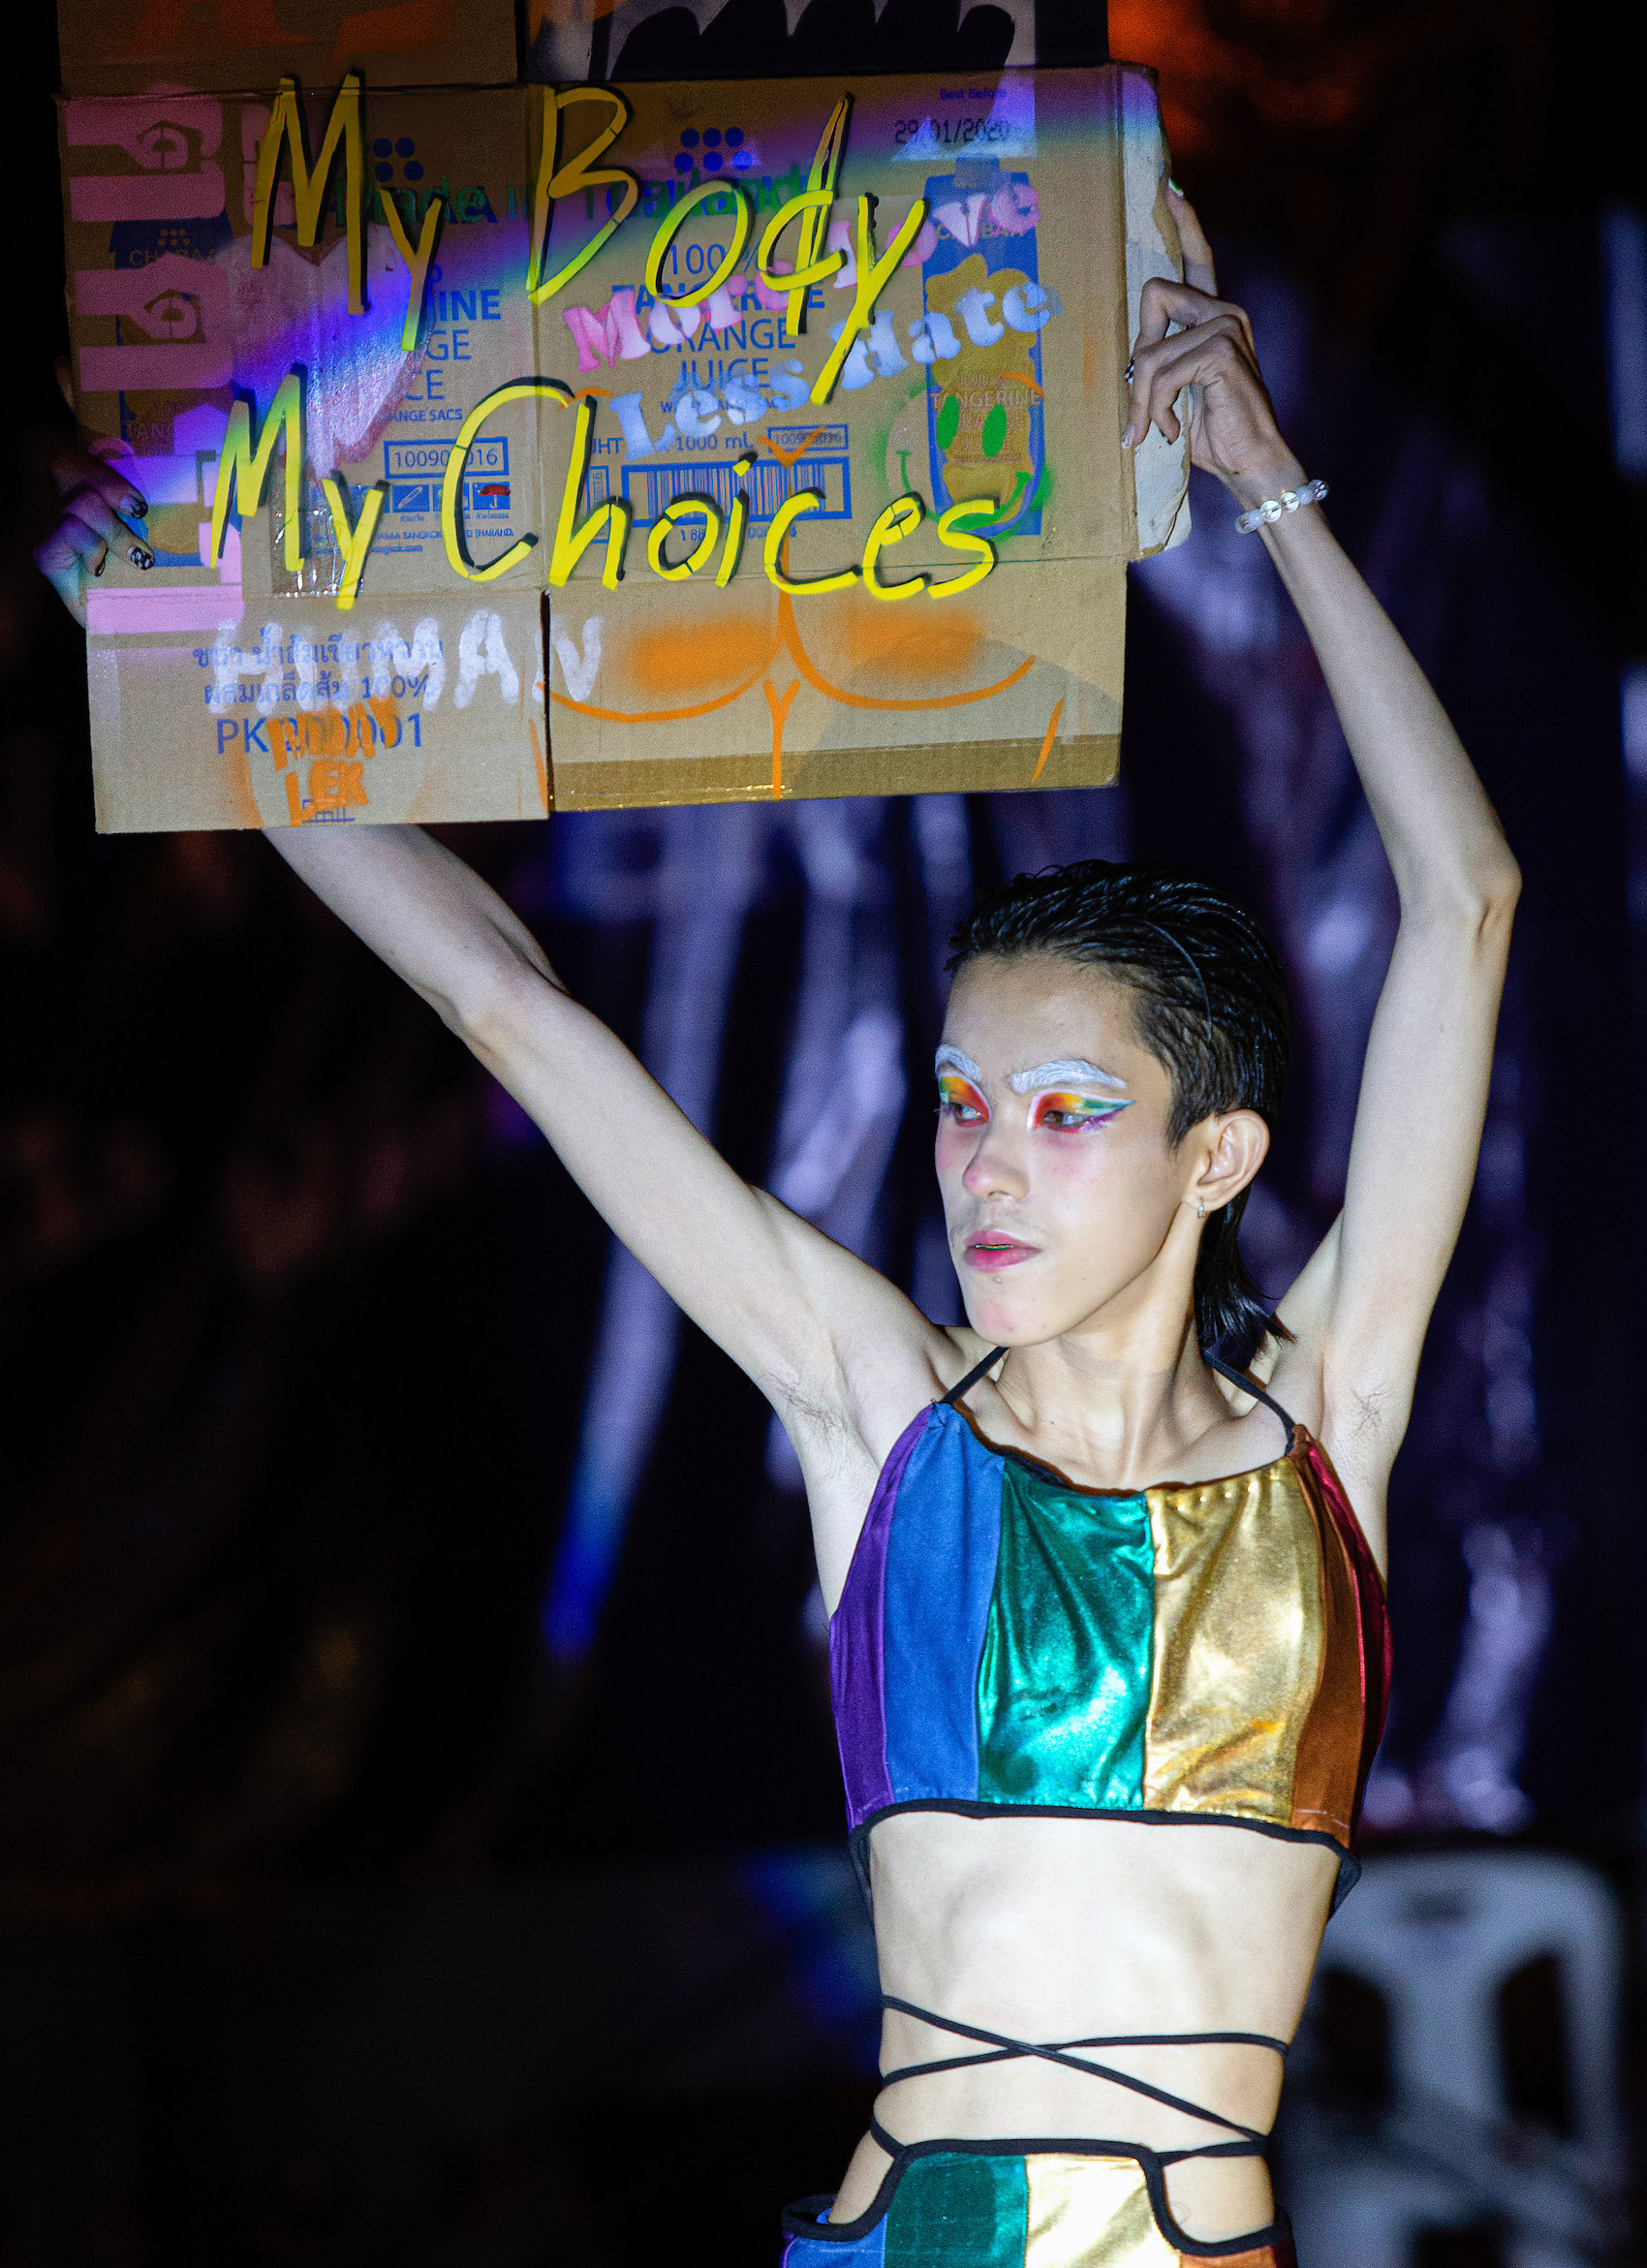 An activist holds a placard that says "My Body My Choices" during a Sex Work Fashion Week on International Labor Day at the Tha Phae Gate